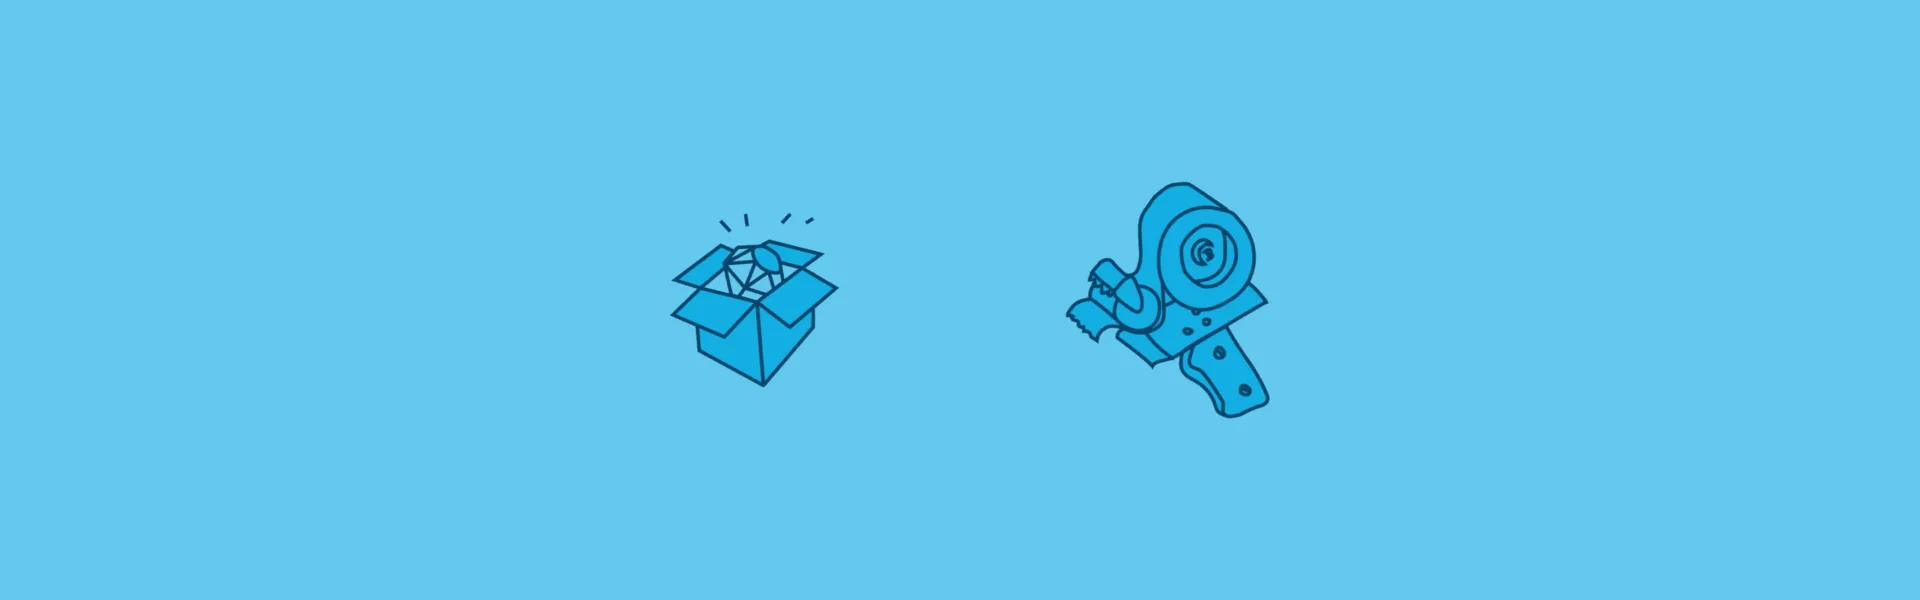 Two illustrations from the Bundler website. One signifies installing Ruby and the other Bundler itself.